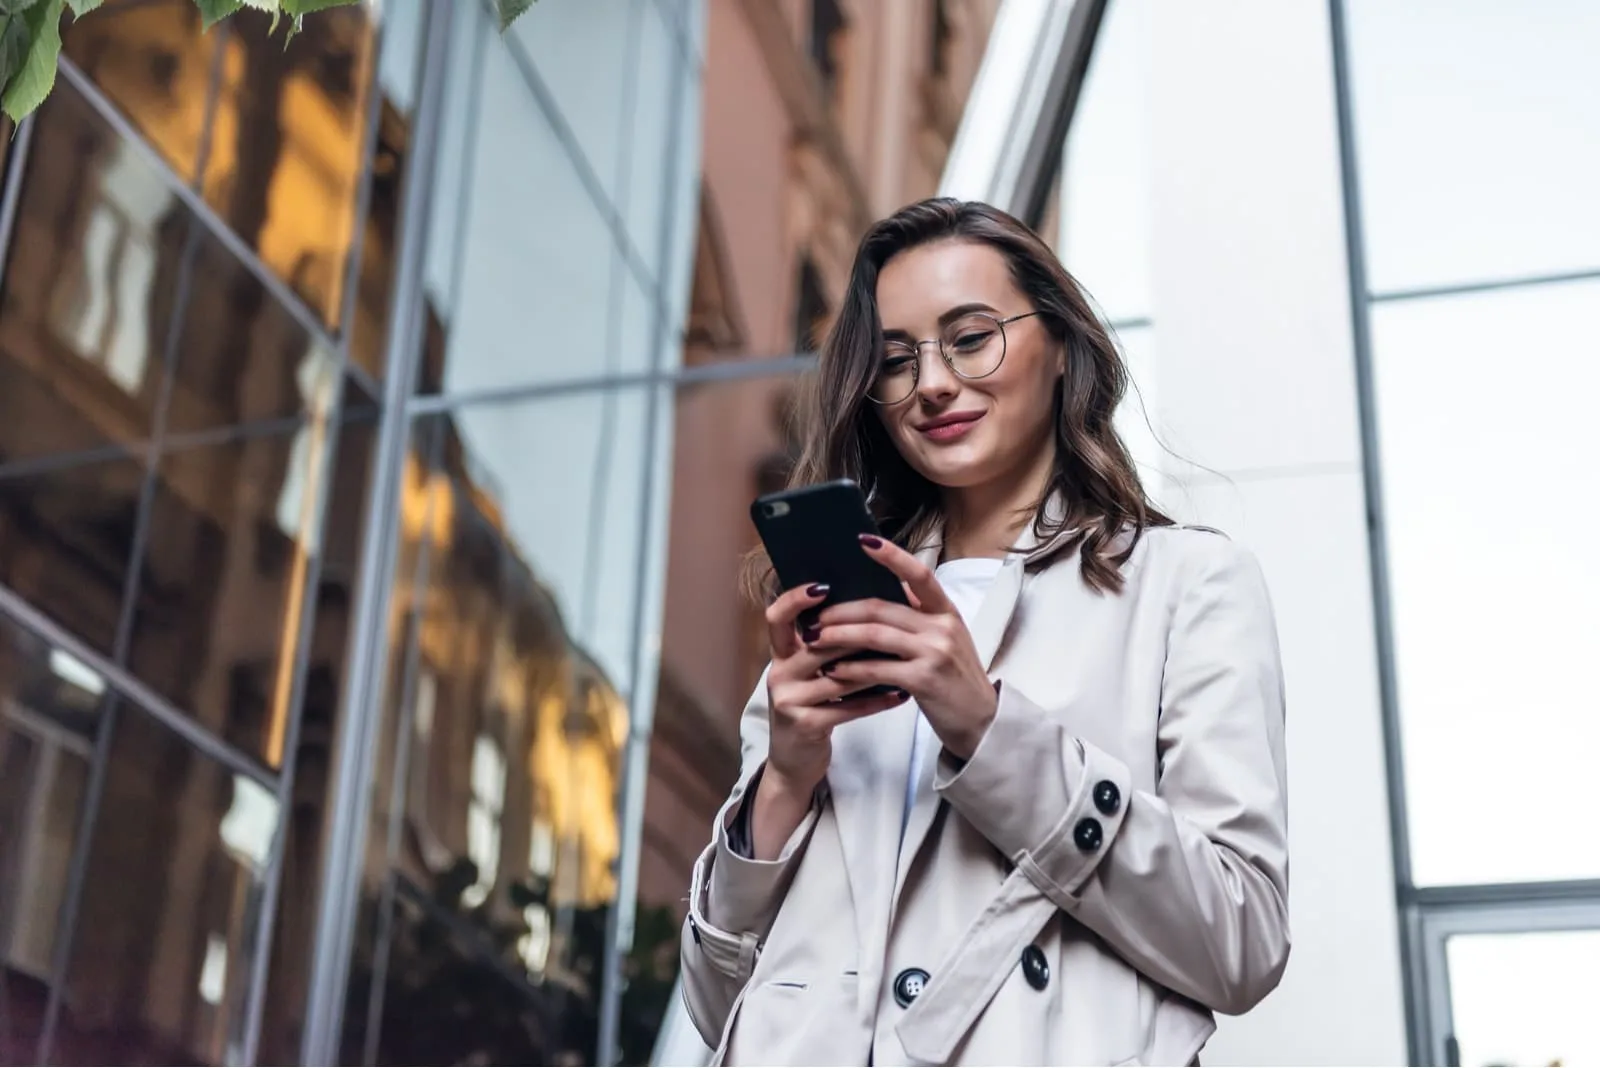 a smiling girl in a white coat stands outside and uses a smartphone